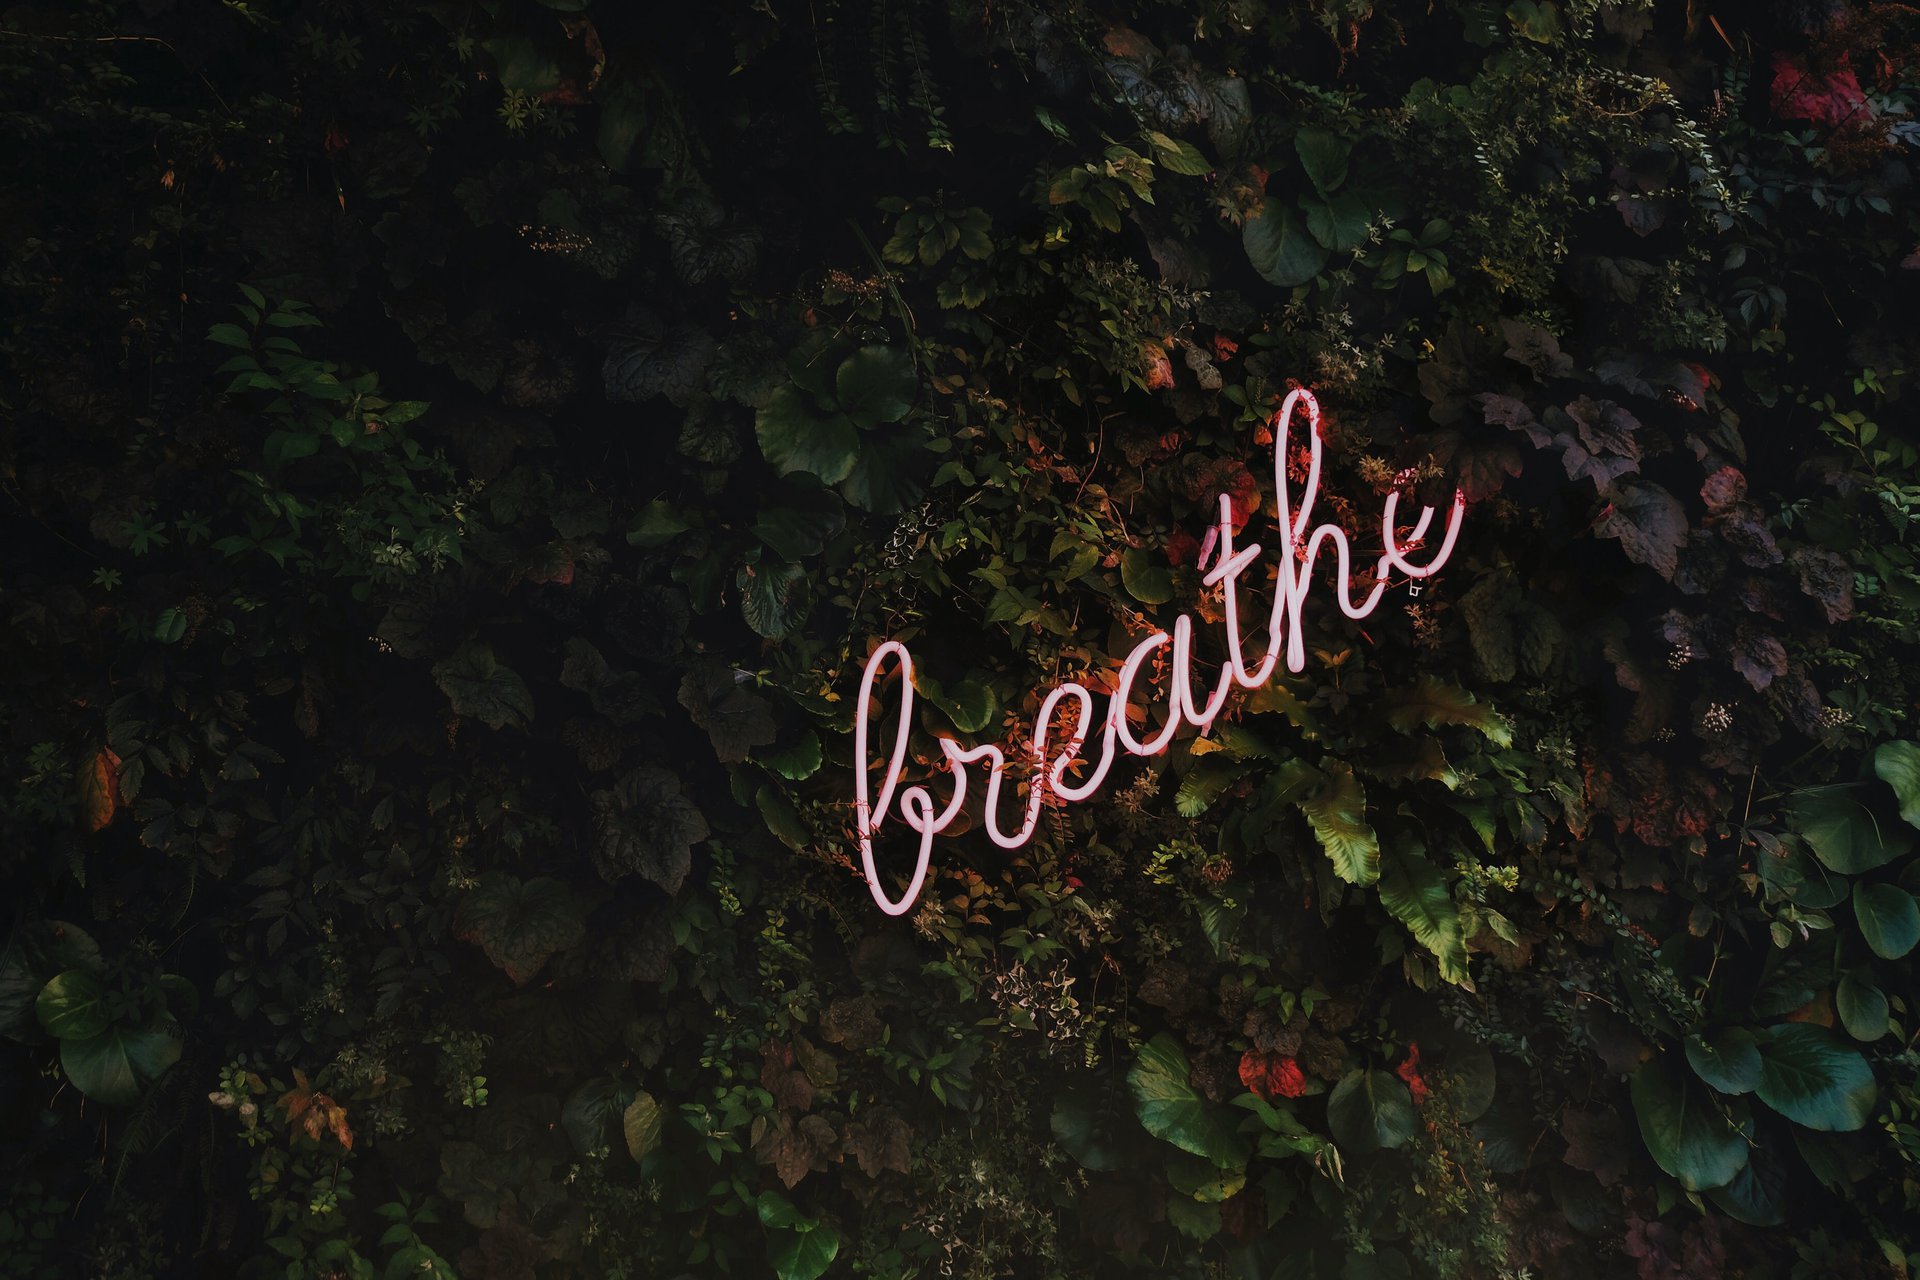 breathe and move on